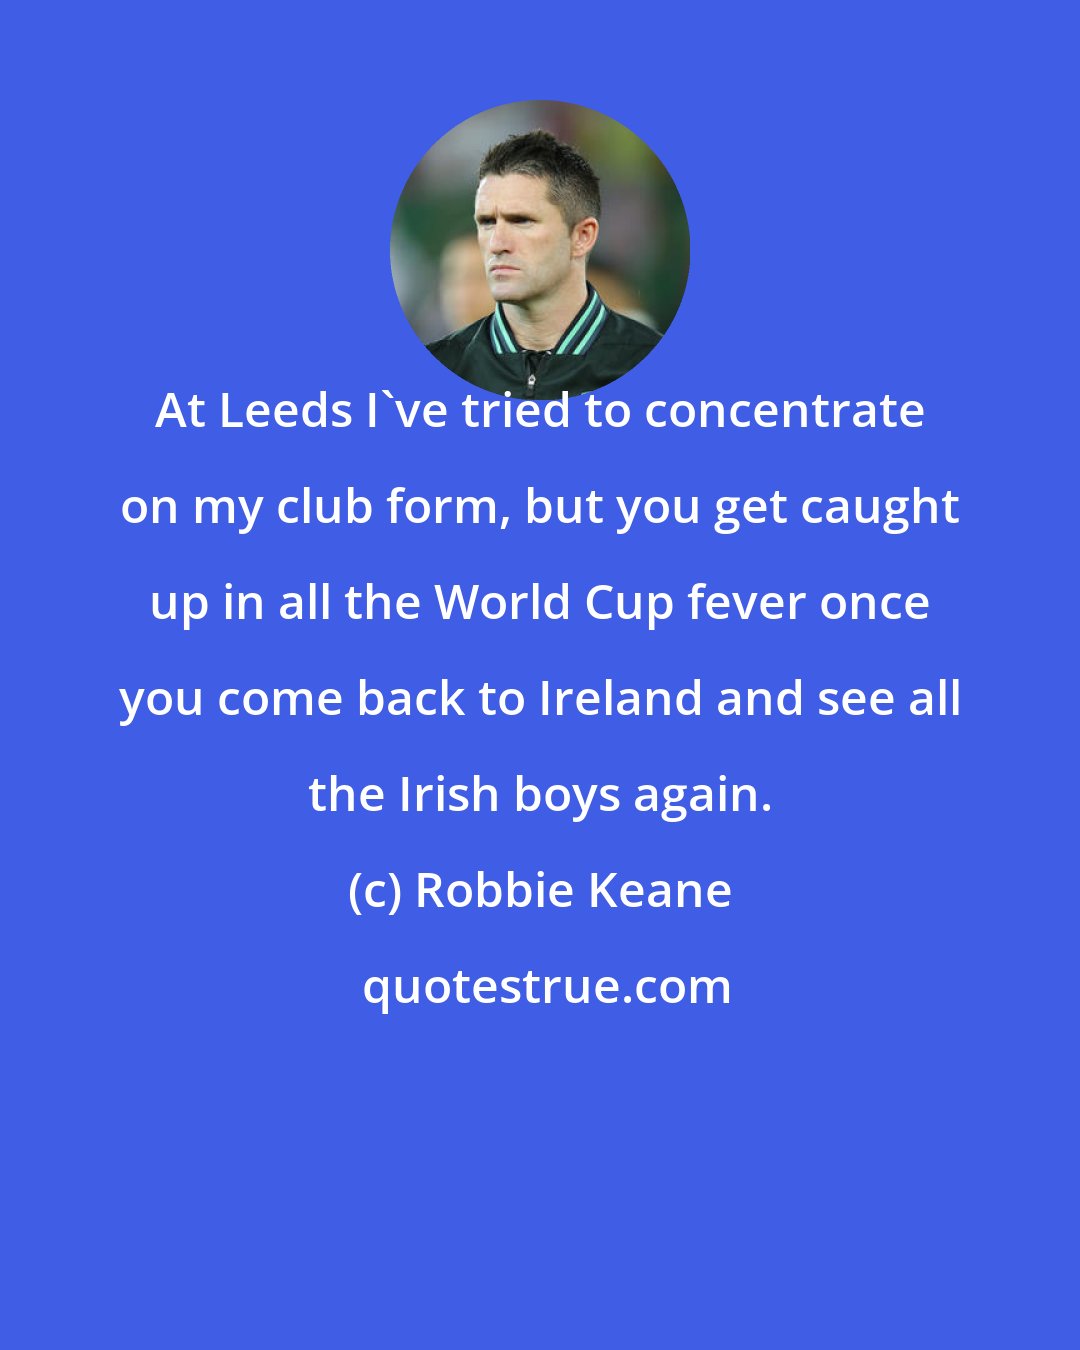 Robbie Keane: At Leeds I've tried to concentrate on my club form, but you get caught up in all the World Cup fever once you come back to Ireland and see all the Irish boys again.